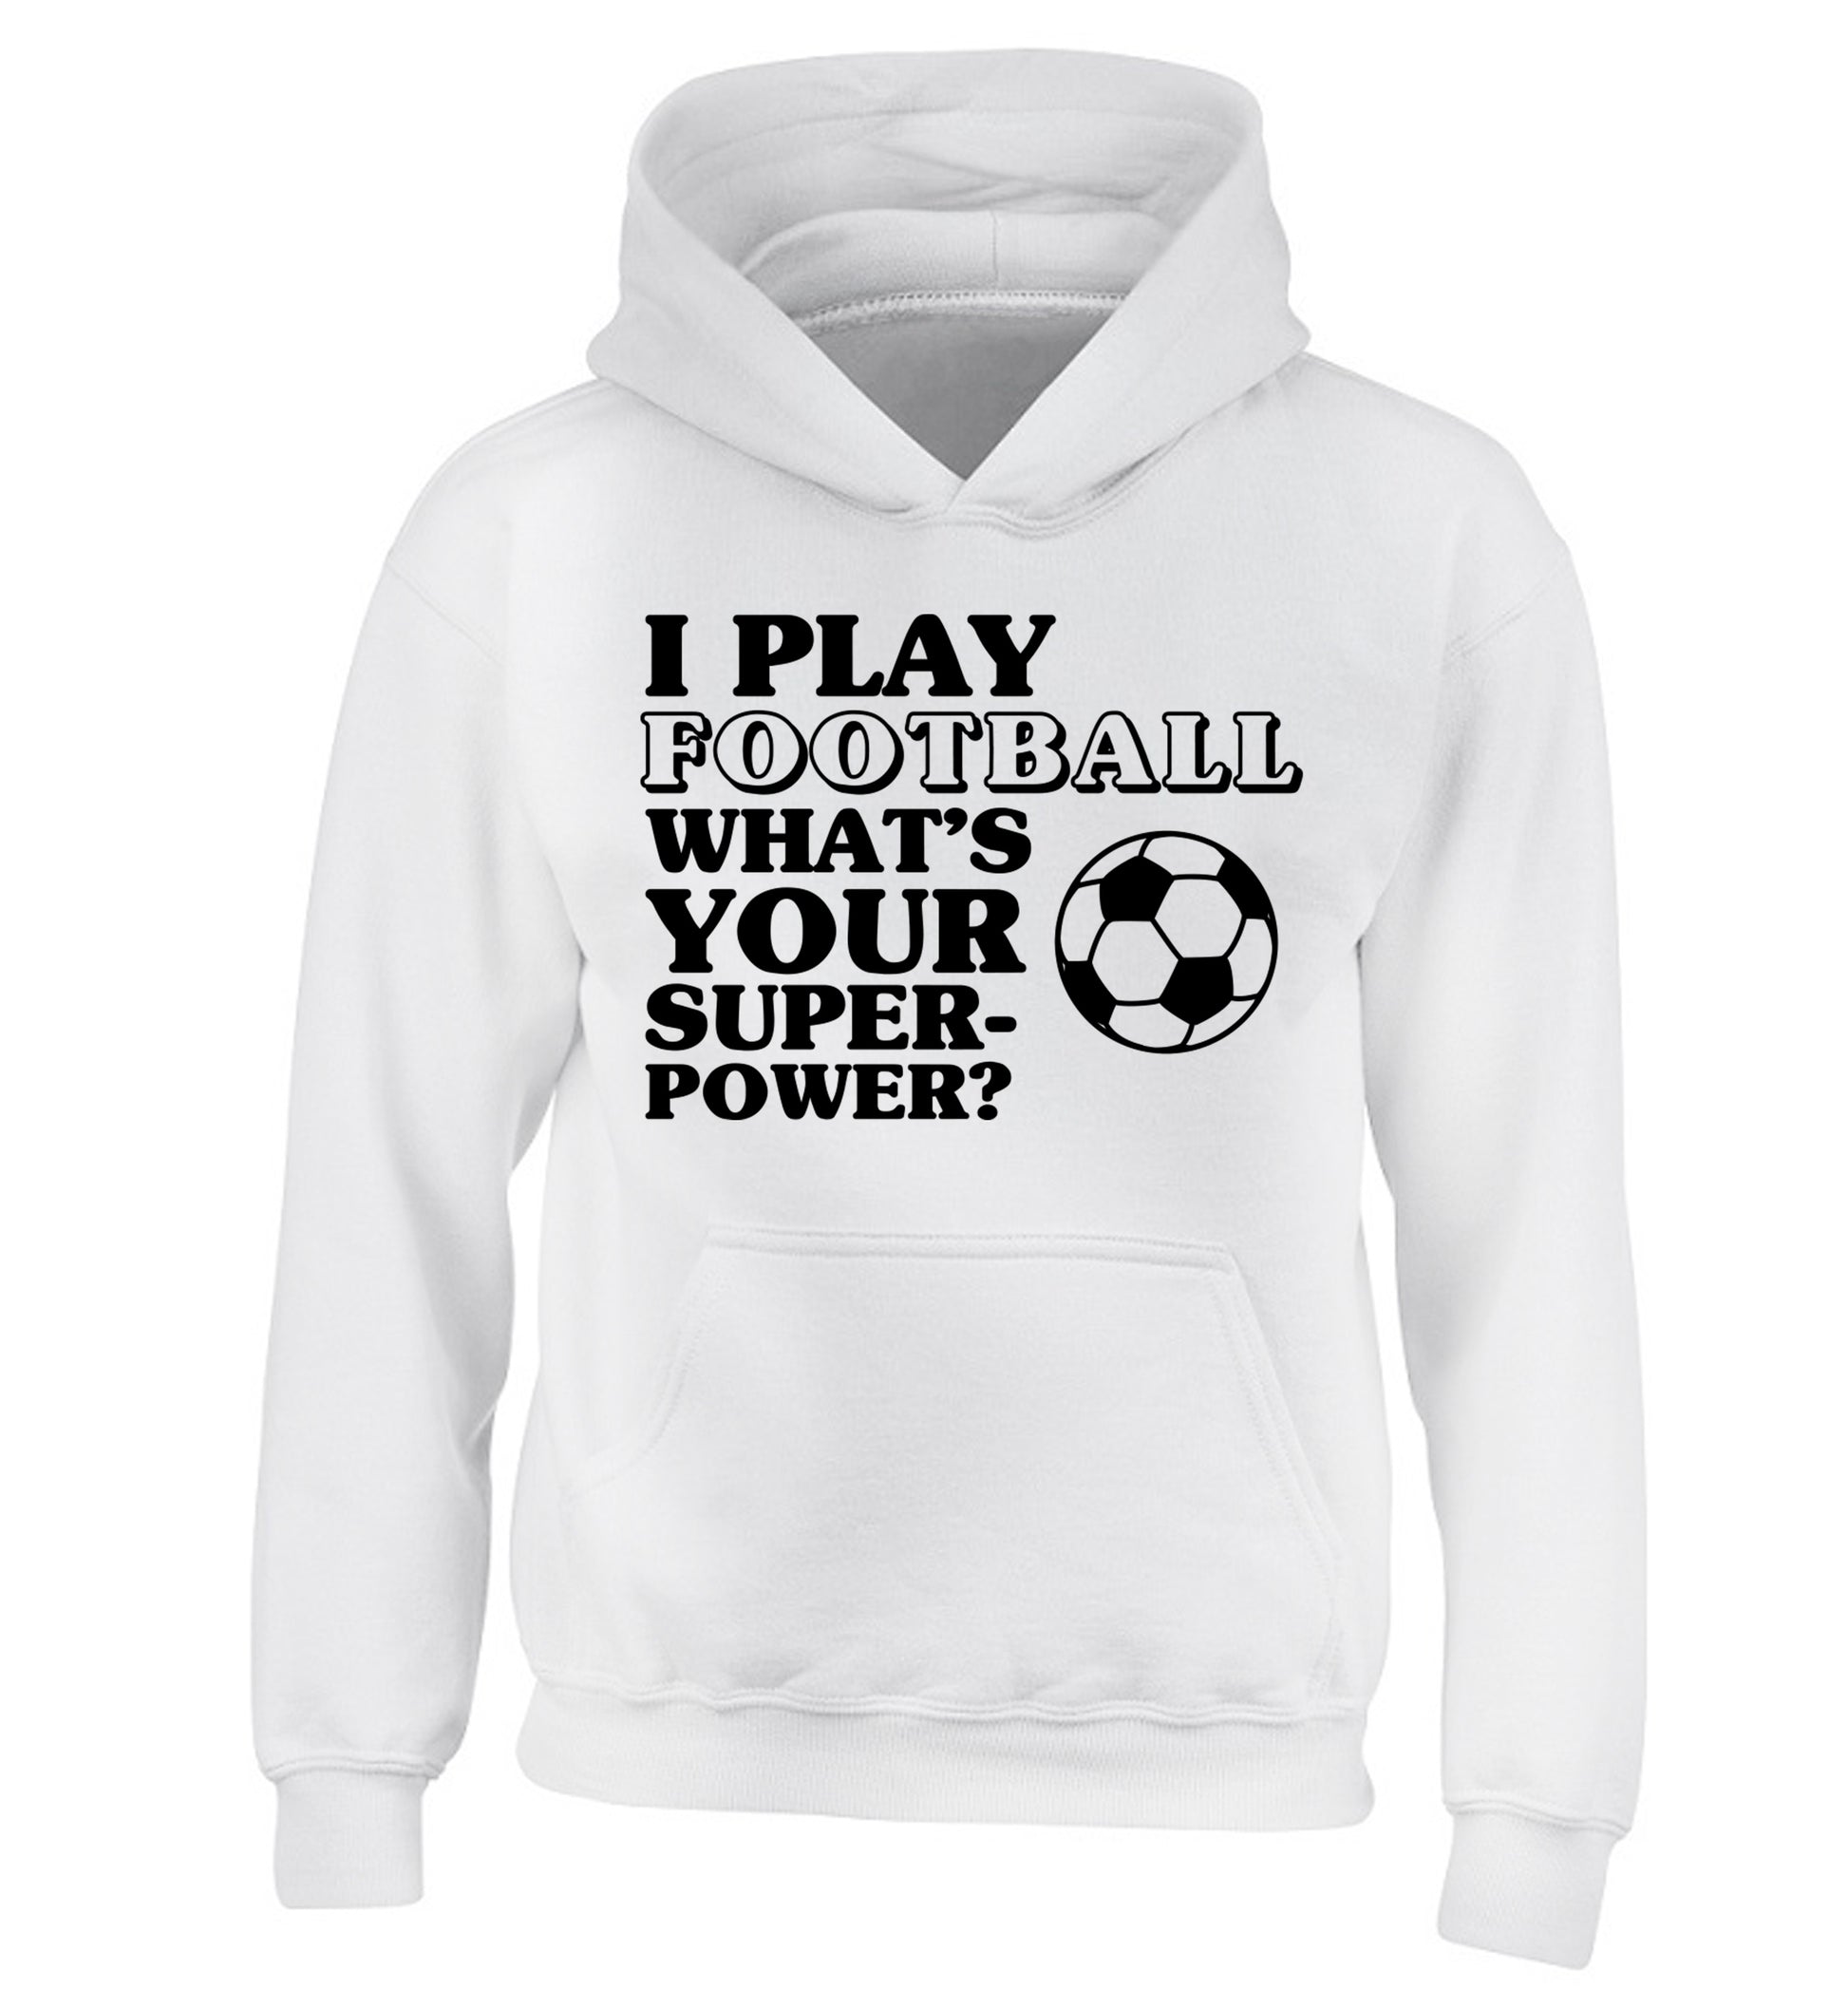 I play football what's your superpower? children's white hoodie 12-14 Years